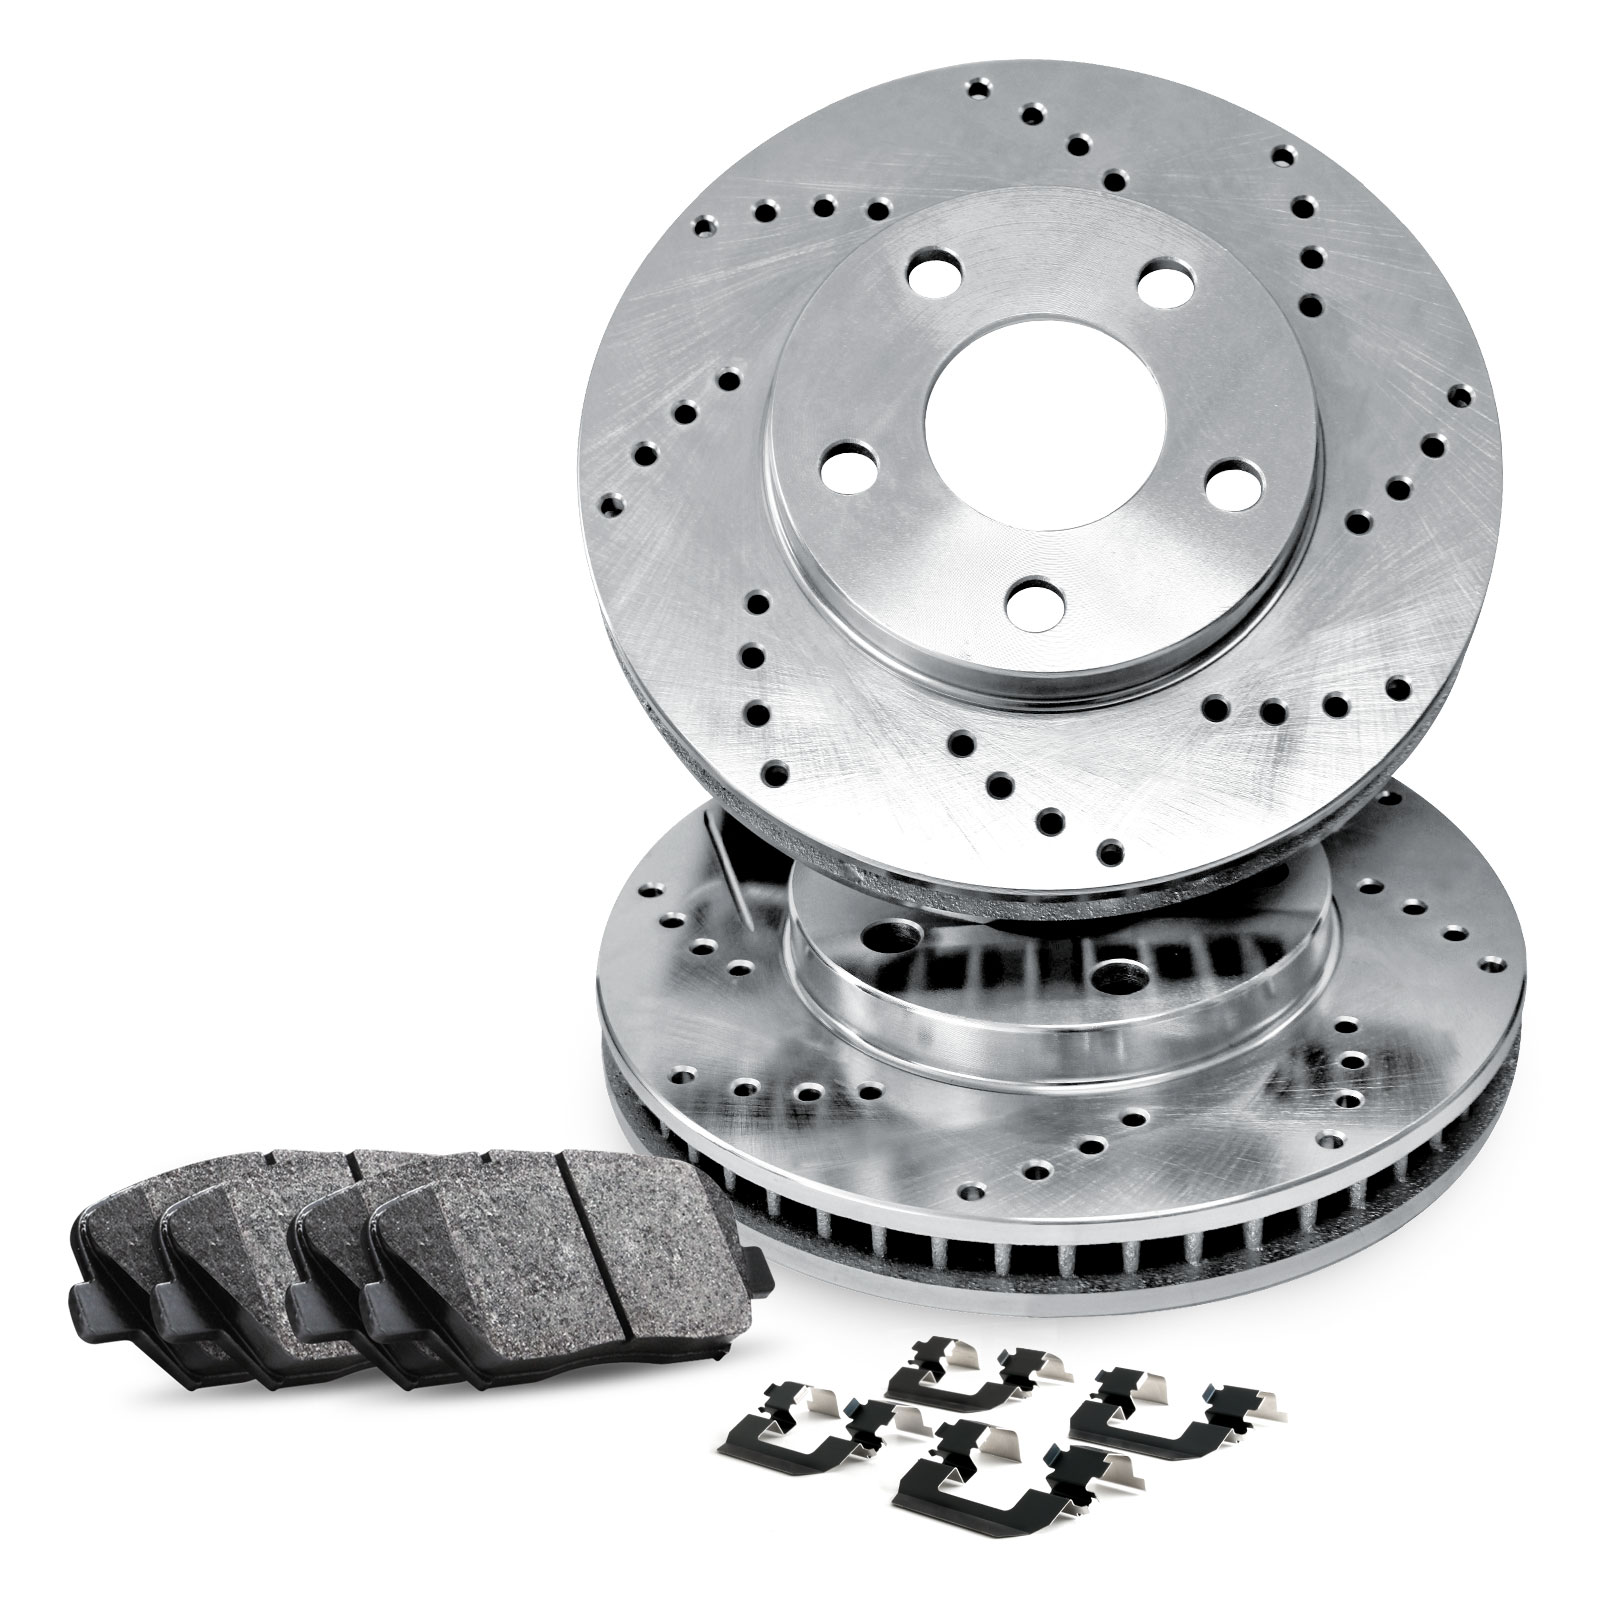 R1 Concepts Fits 2015 Ford Mustang Front eLine Drilled Brake Disc Rotors & Ceramic Brake Pad